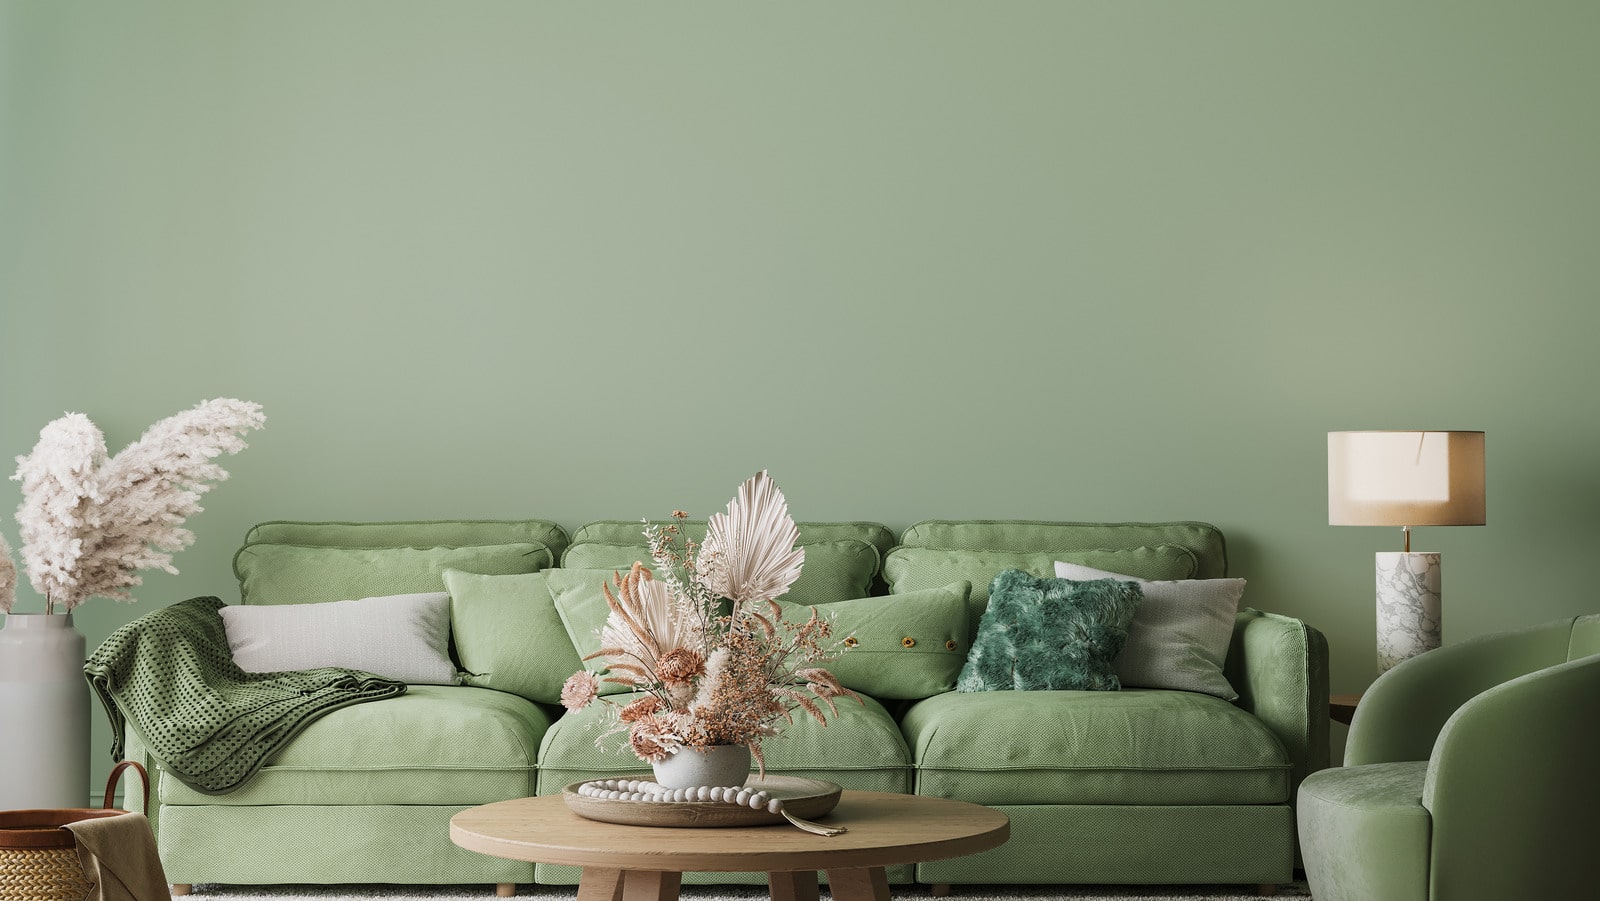 How to Maintain and Keep Walls Clean when Painted with a Sage Green Shade?